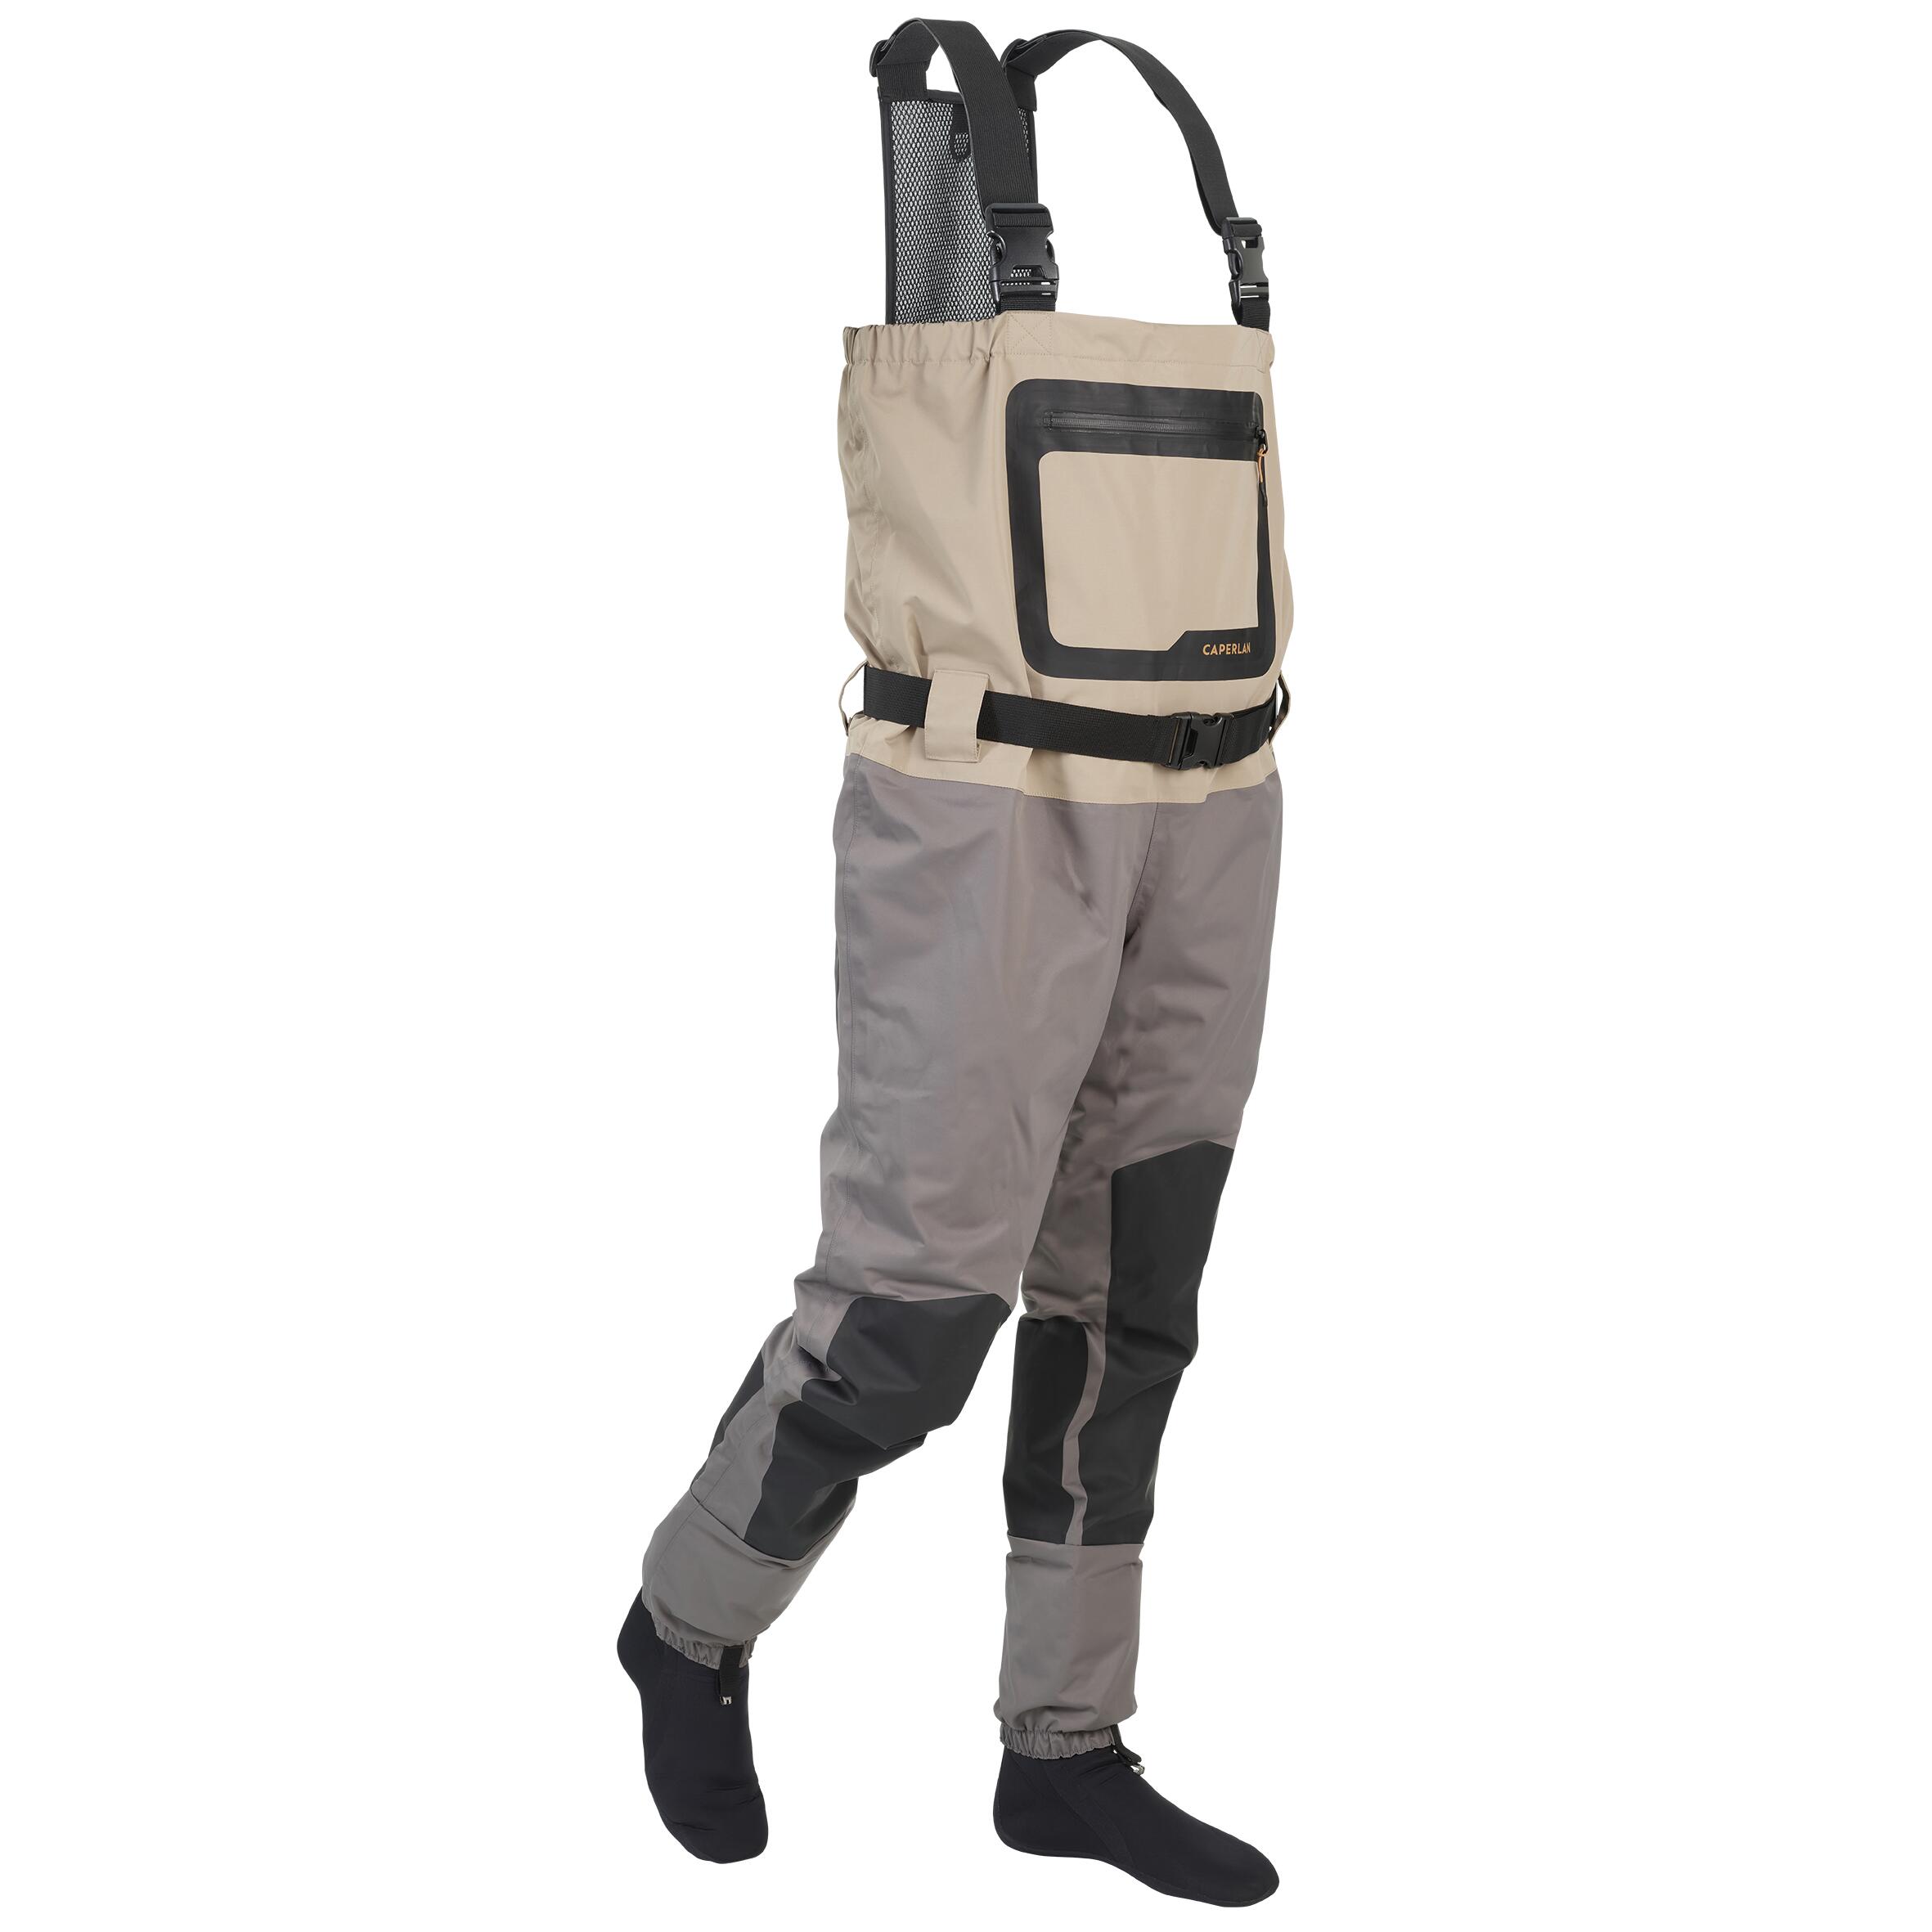 Fishing breathable waders with neoprene booties - WDS 500 BR-S 9/10